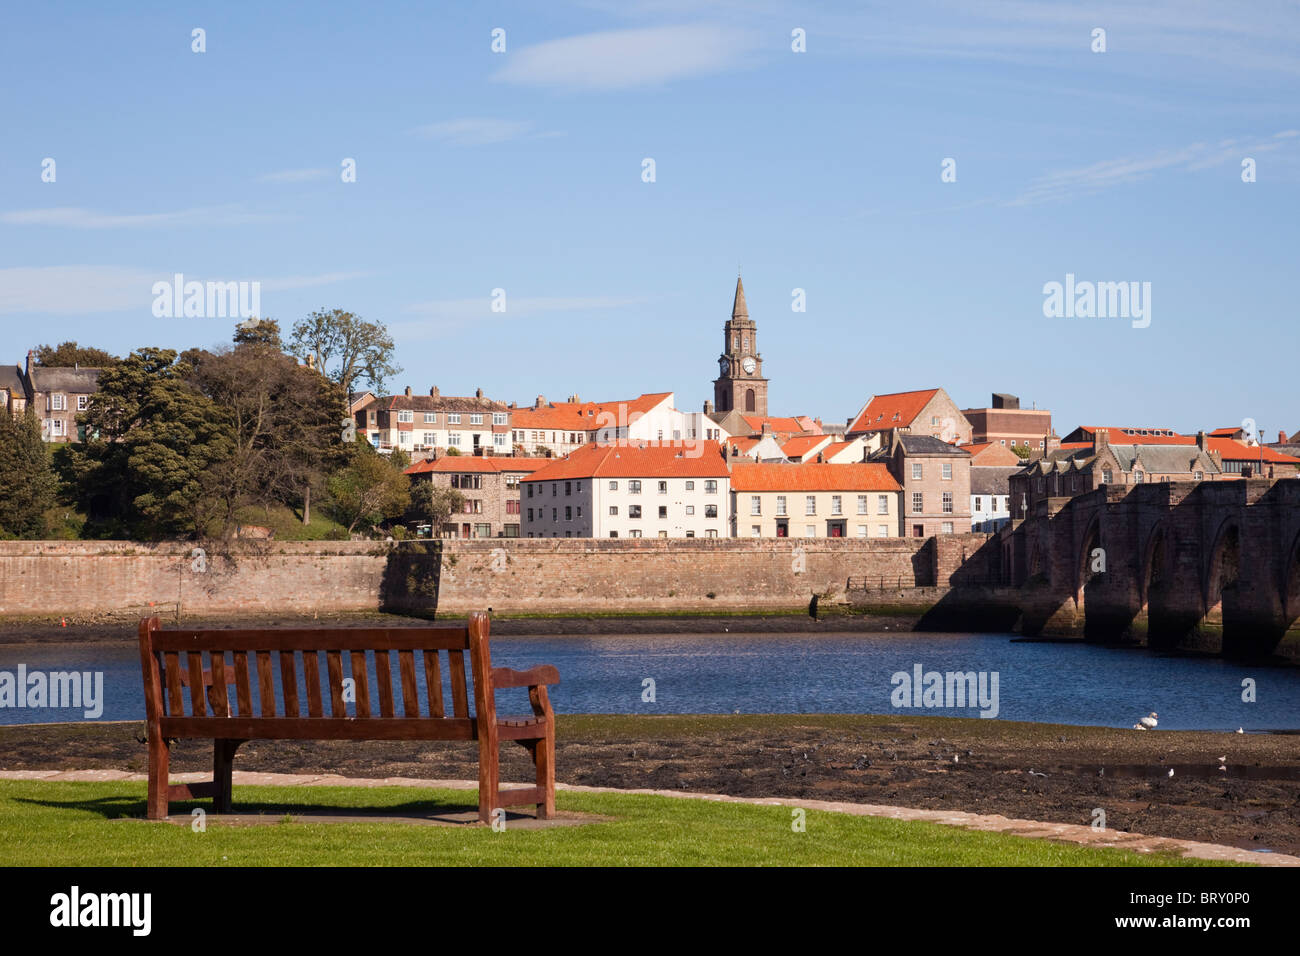 View across the River Tweed to Berwick upon Tweed town waterfront by the old bridge from Tweedmouth Northumberland England UK Britain. Stock Photo